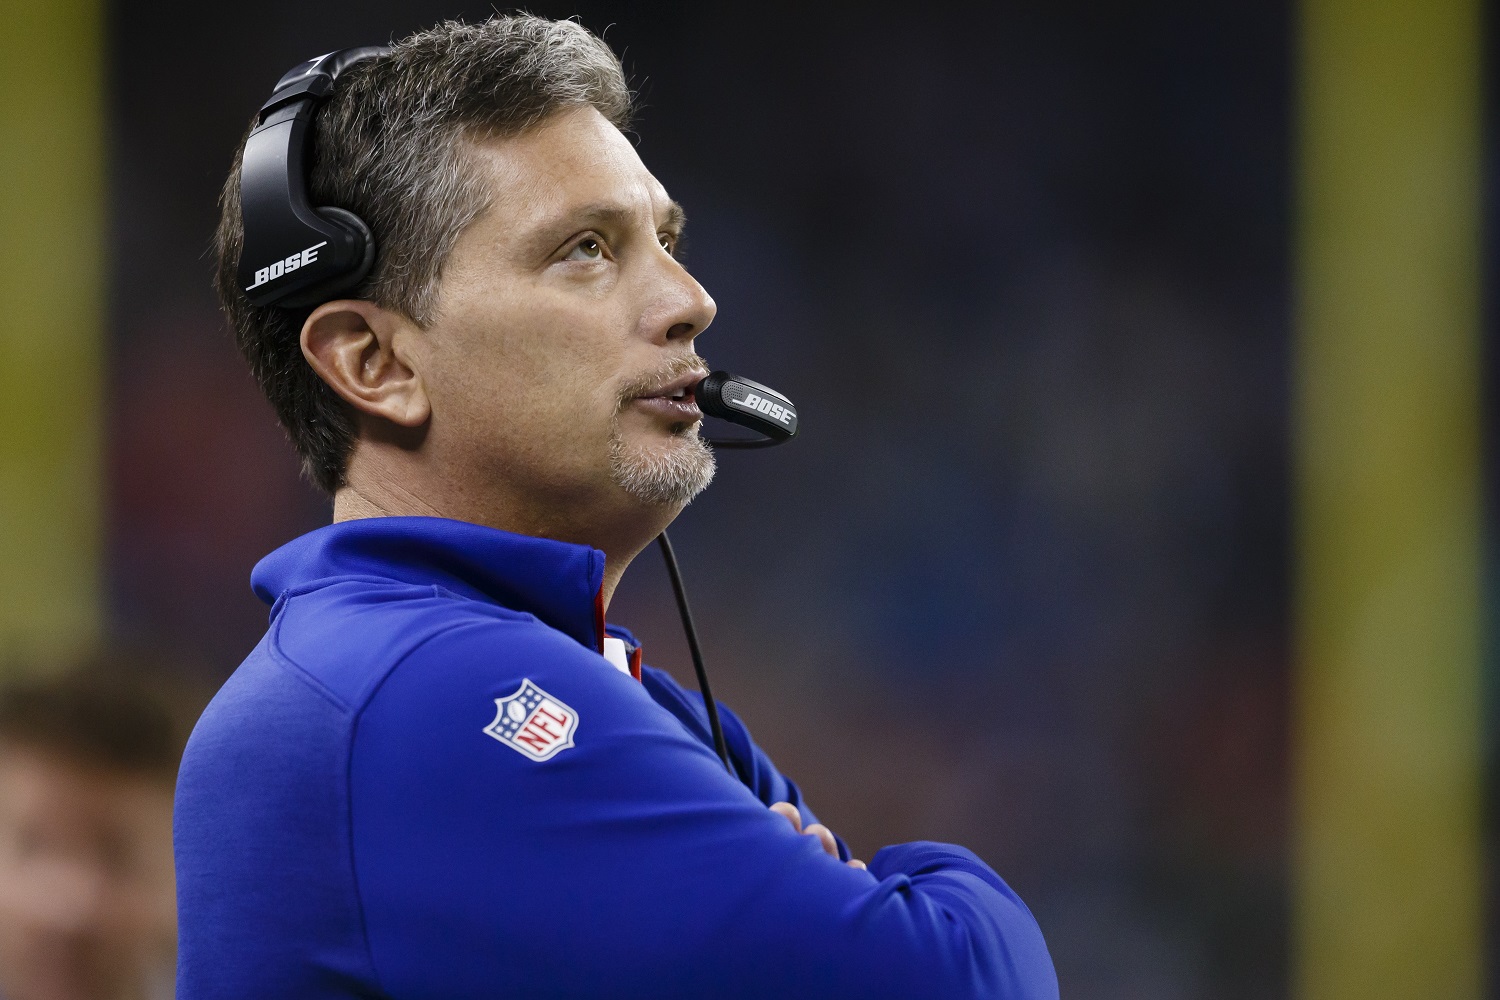 Buffalo Bills defensive coordinator Jim Schwartz on the sideline against the New York Jets during an NFL football game at Ford Field in Detroit, Monday, Nov. 24, 2014. (AP Photo/Rick Osentoski)